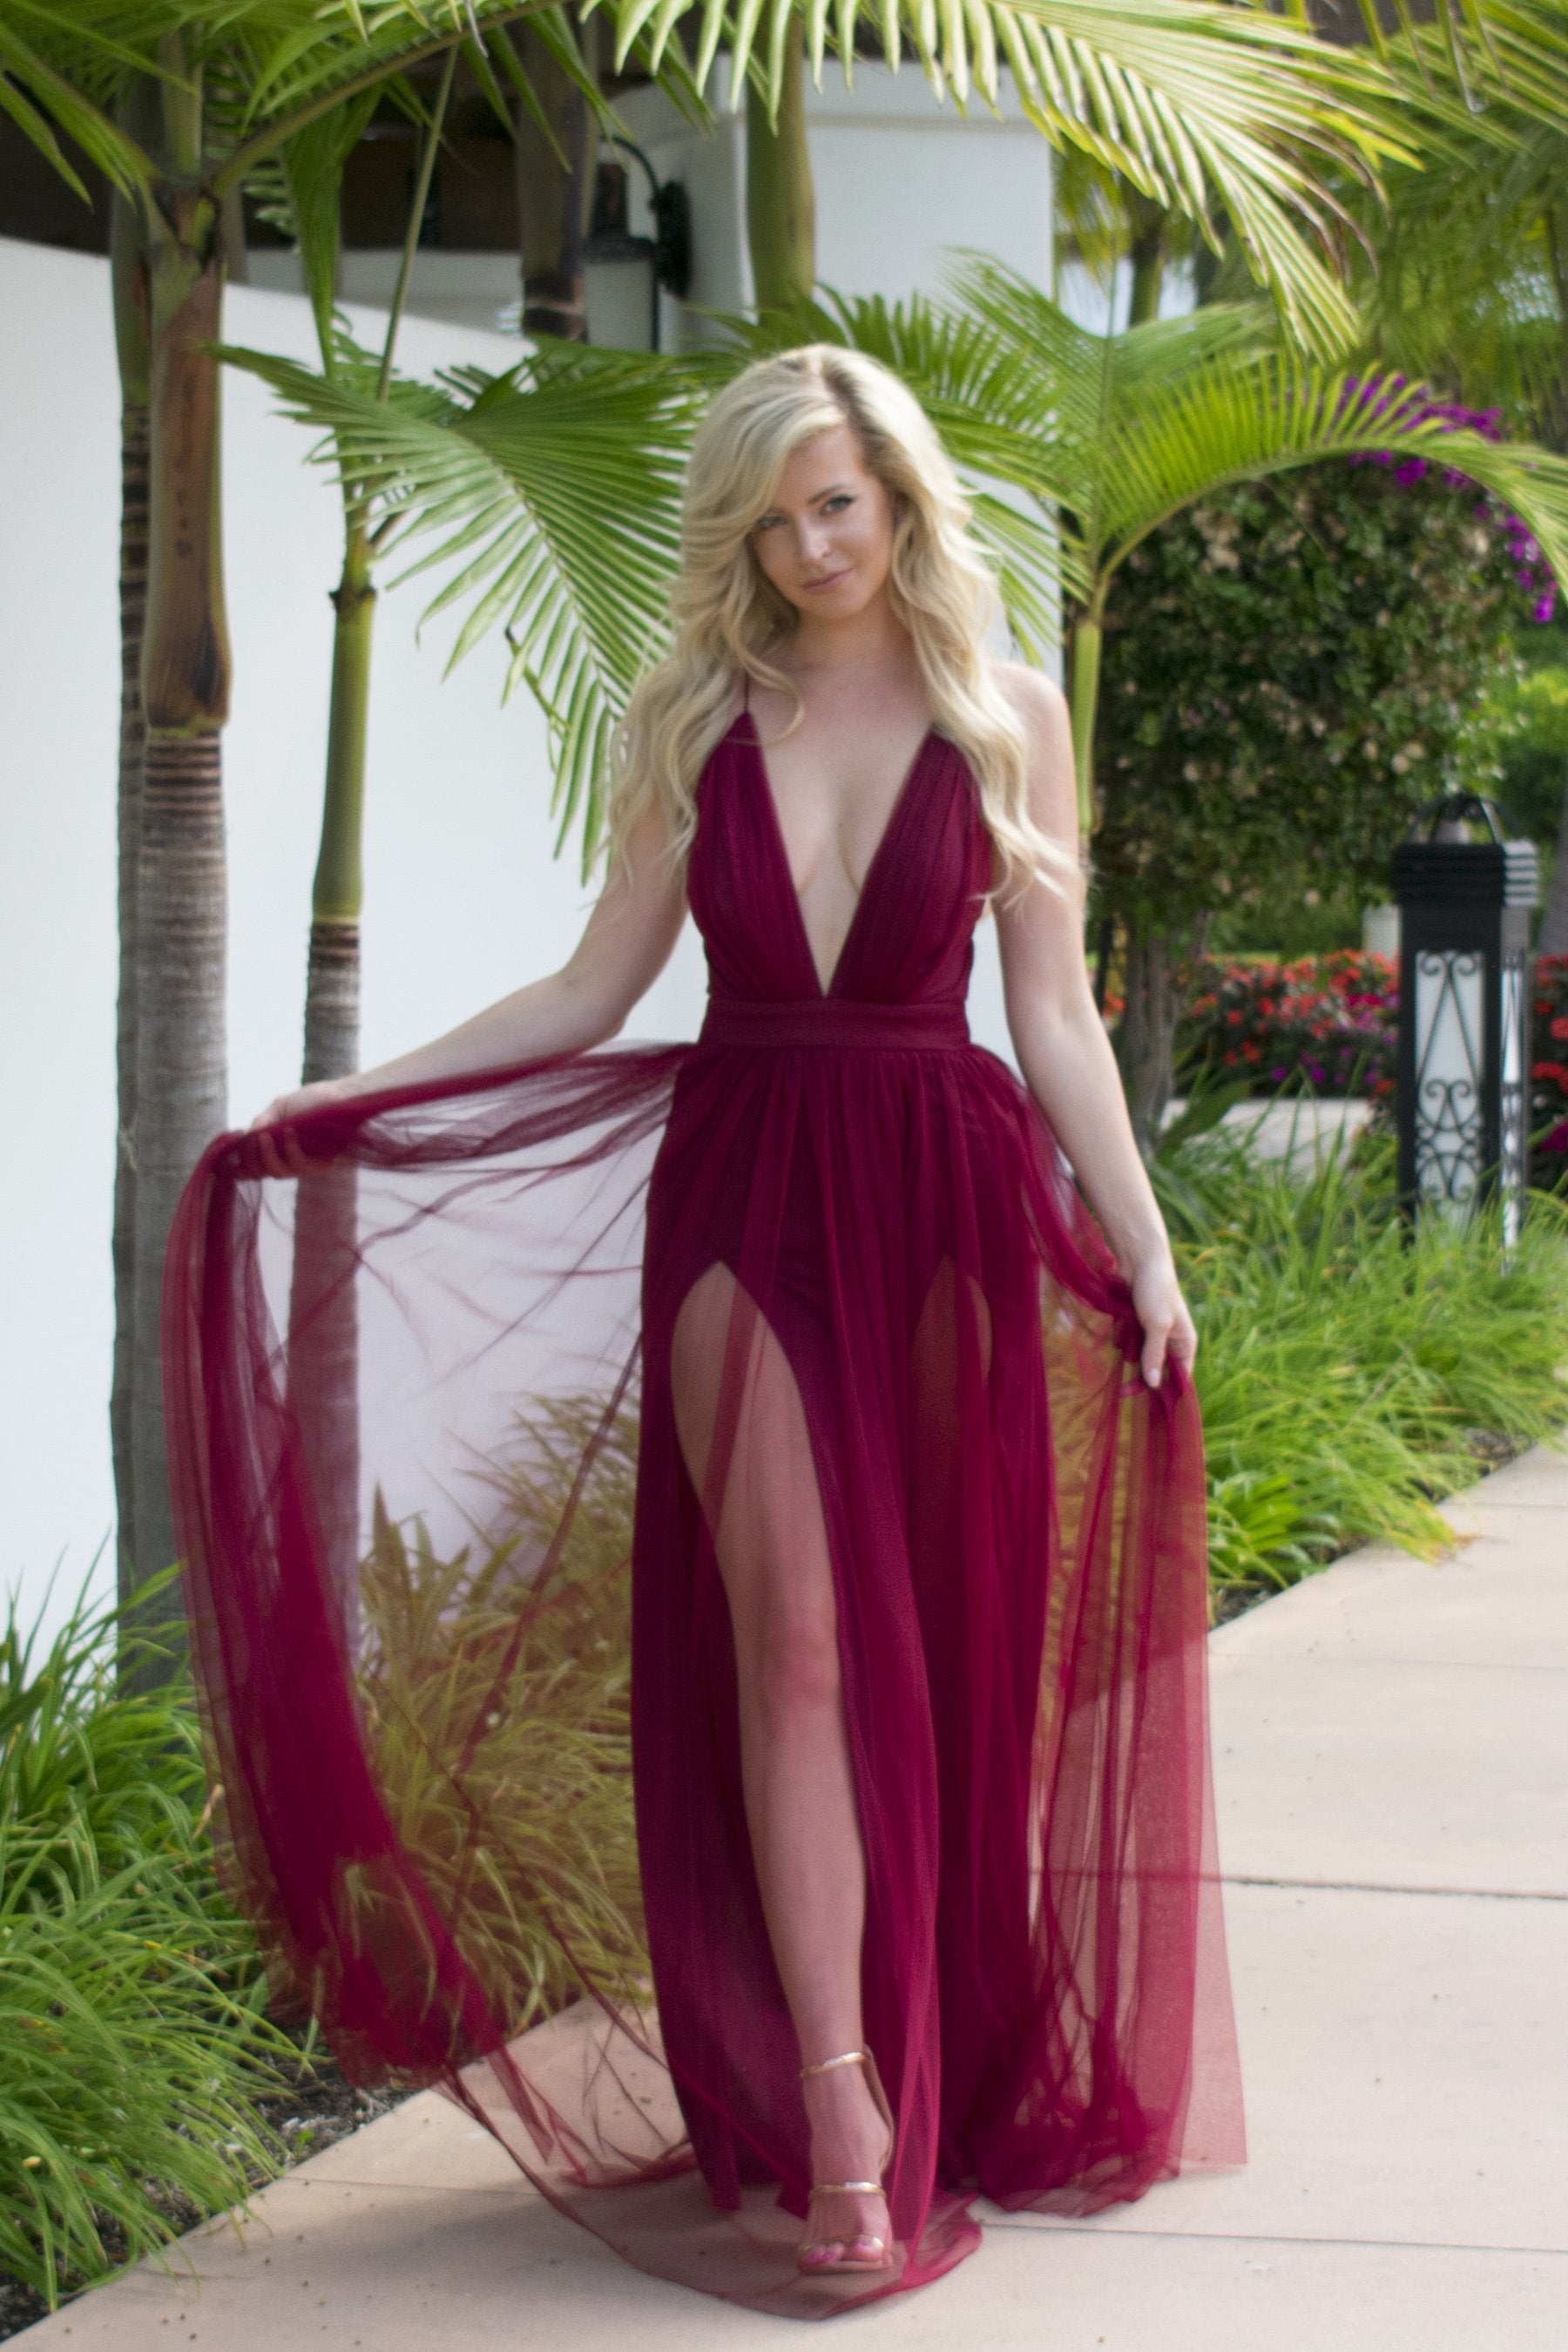 Maui gown red burgundy tulle prom dress with double slits